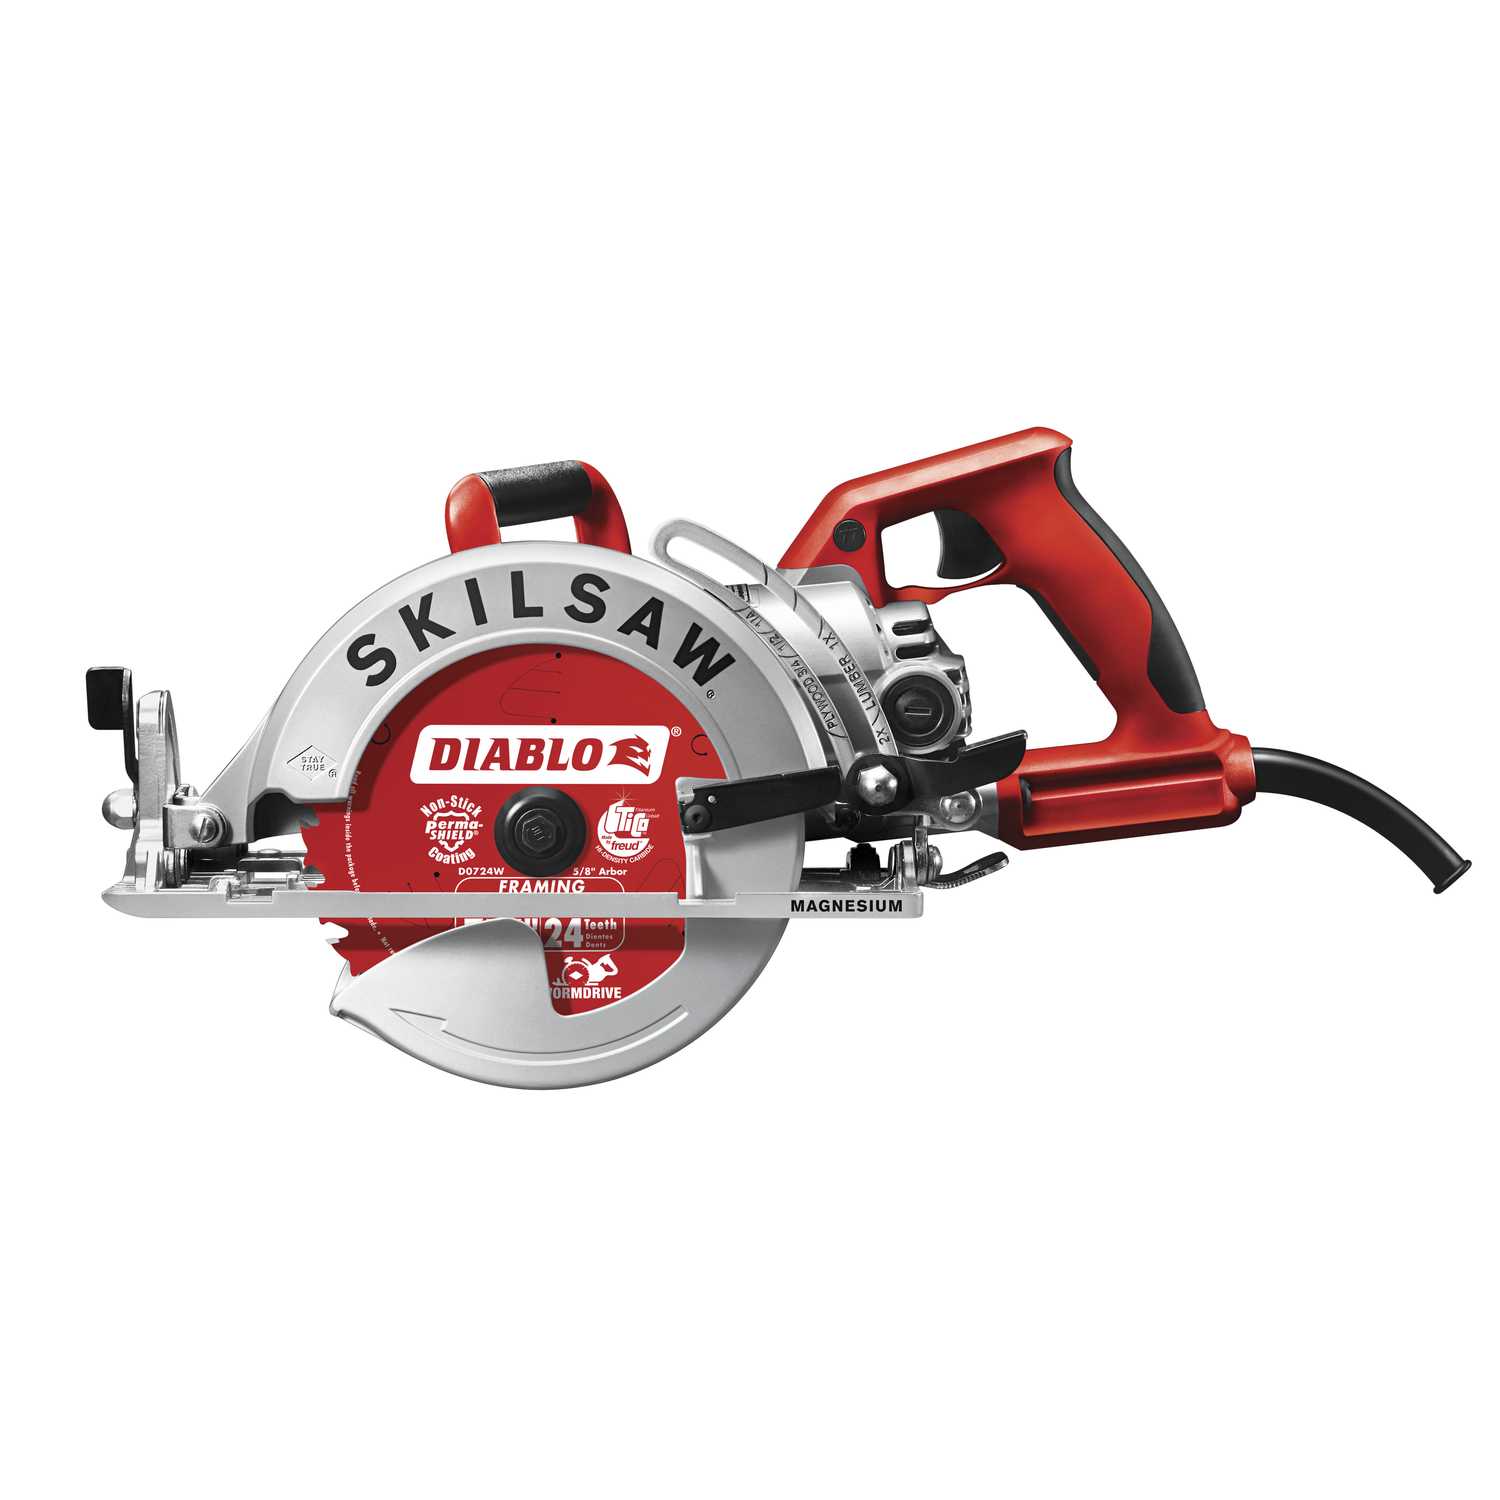 SKILSAW 7-1/4 in. Corded 15 amps Worm Drive Mag Saw Kit 5300 rpm